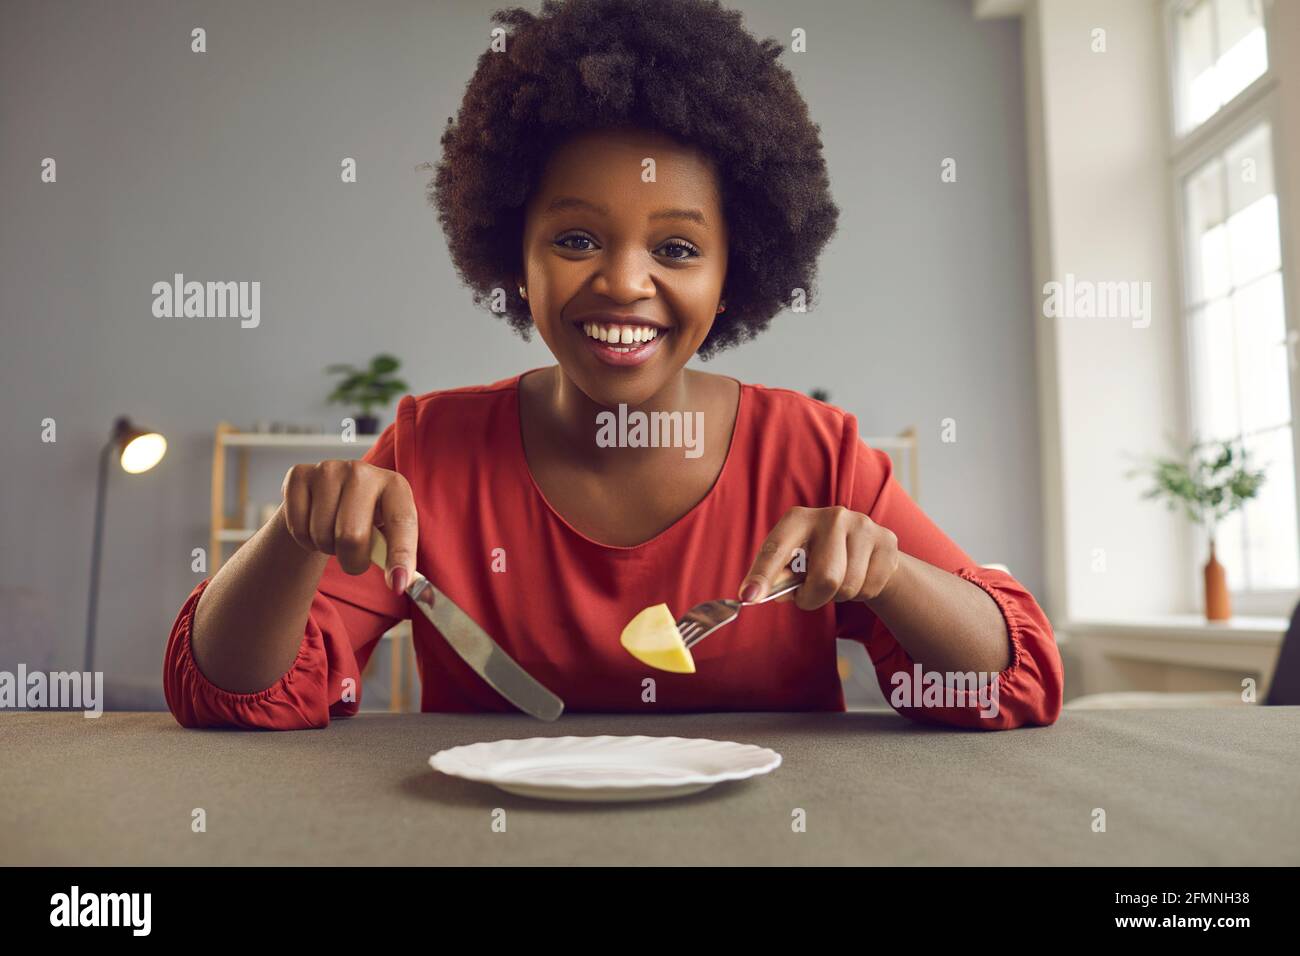 Happy smiling african american woman on diet eating apple looking at camera Stock Photo